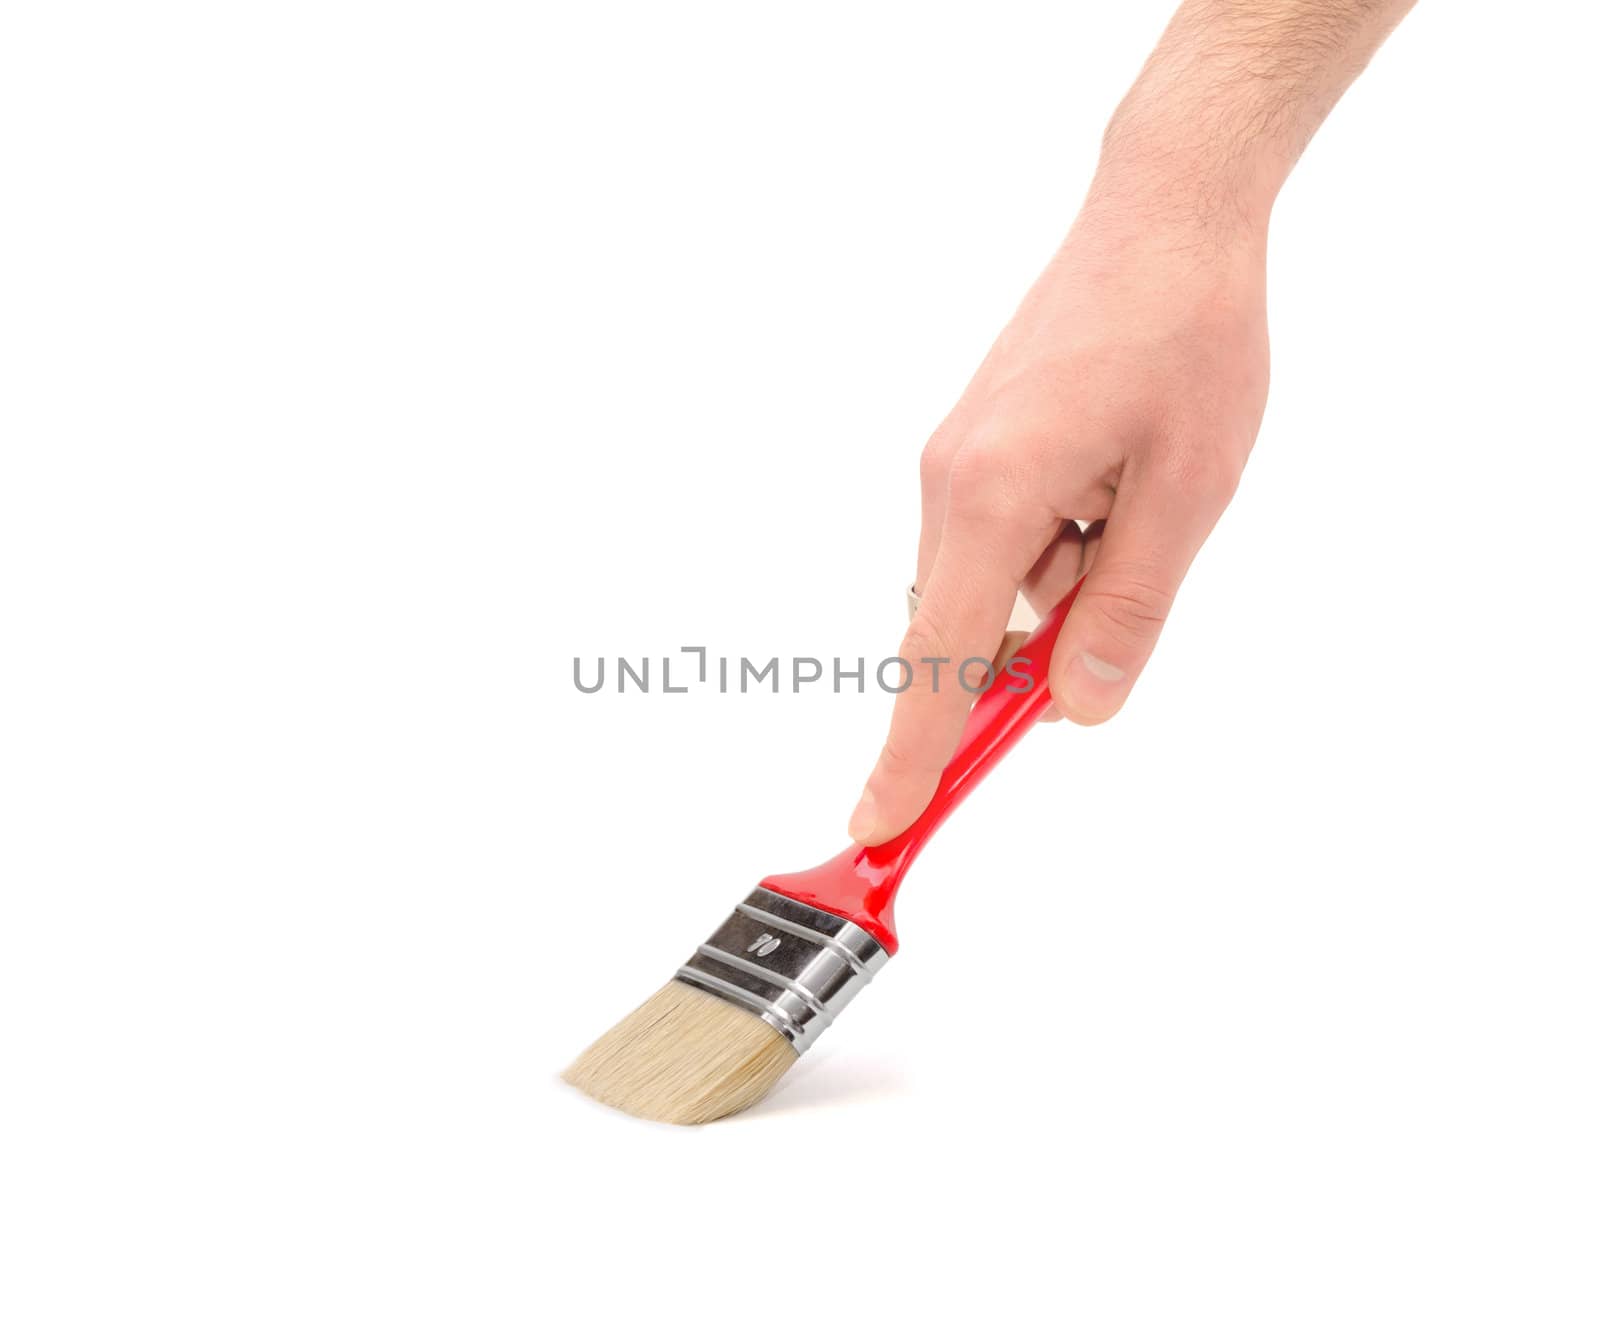 Human hand with a brush on a white background